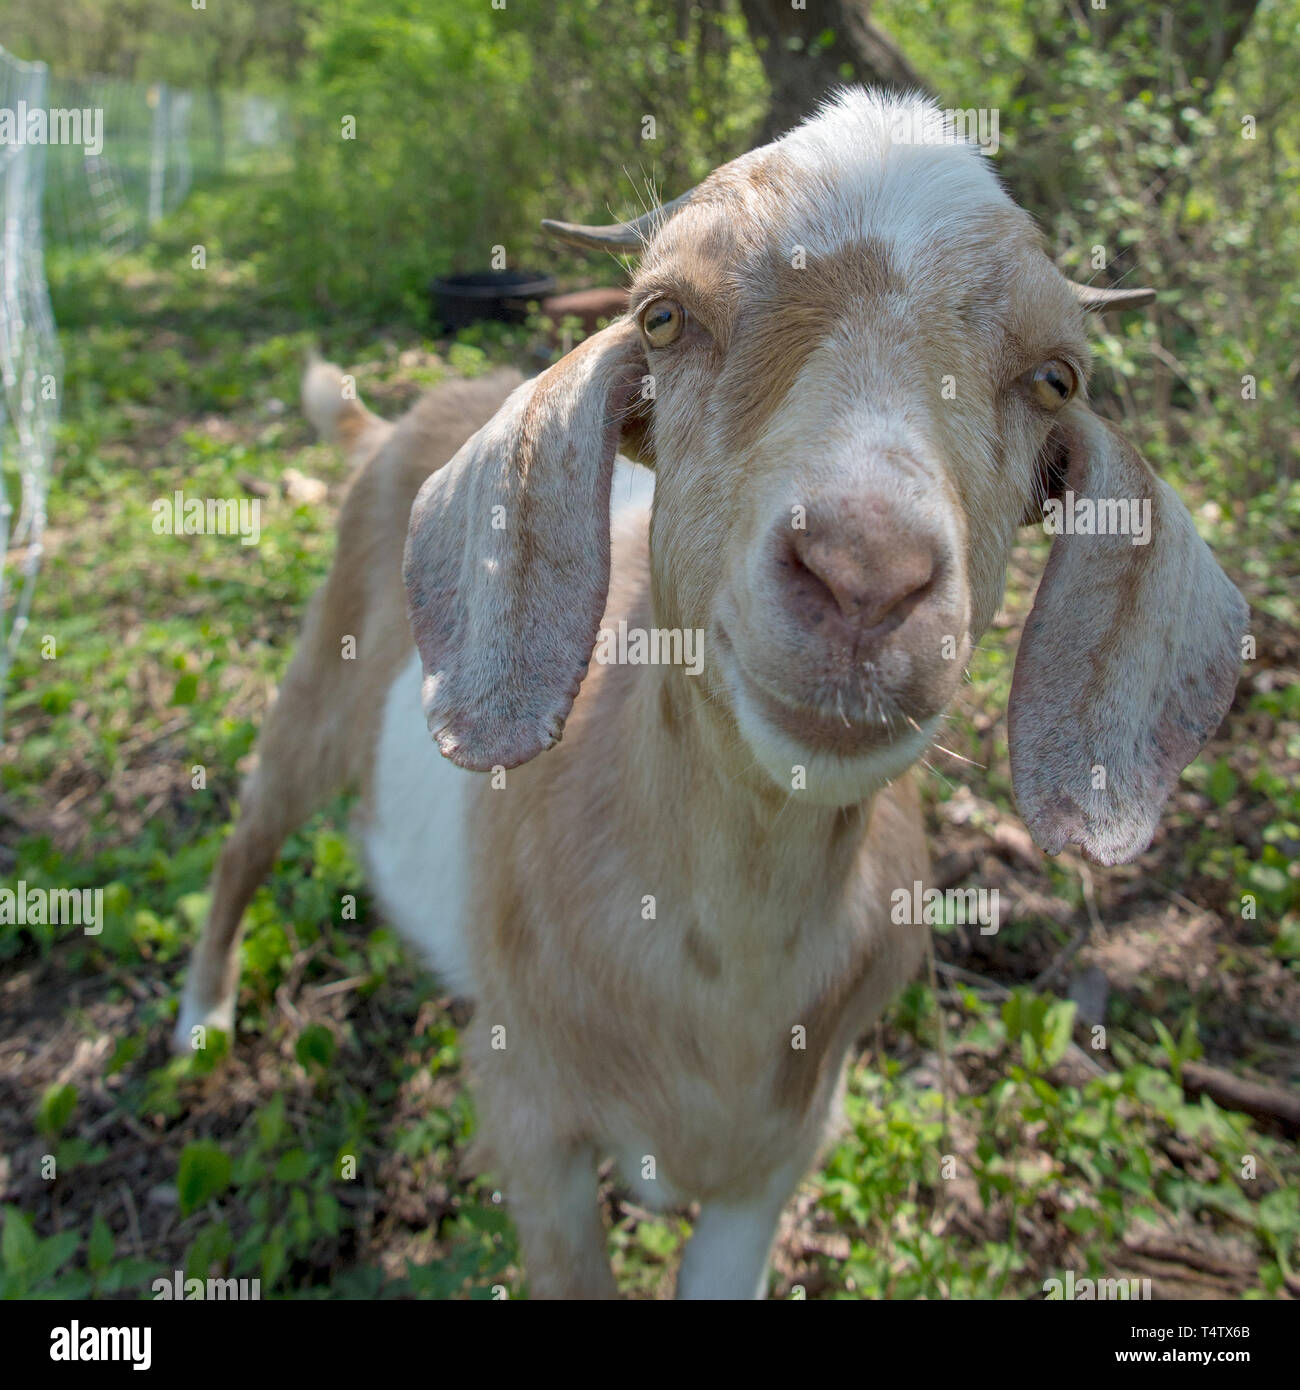 A 'targeted grazing' or 'conservation grazing' goat poses for the photographer in Southwoods Park, West Des Moines, Iowa Stock Photo